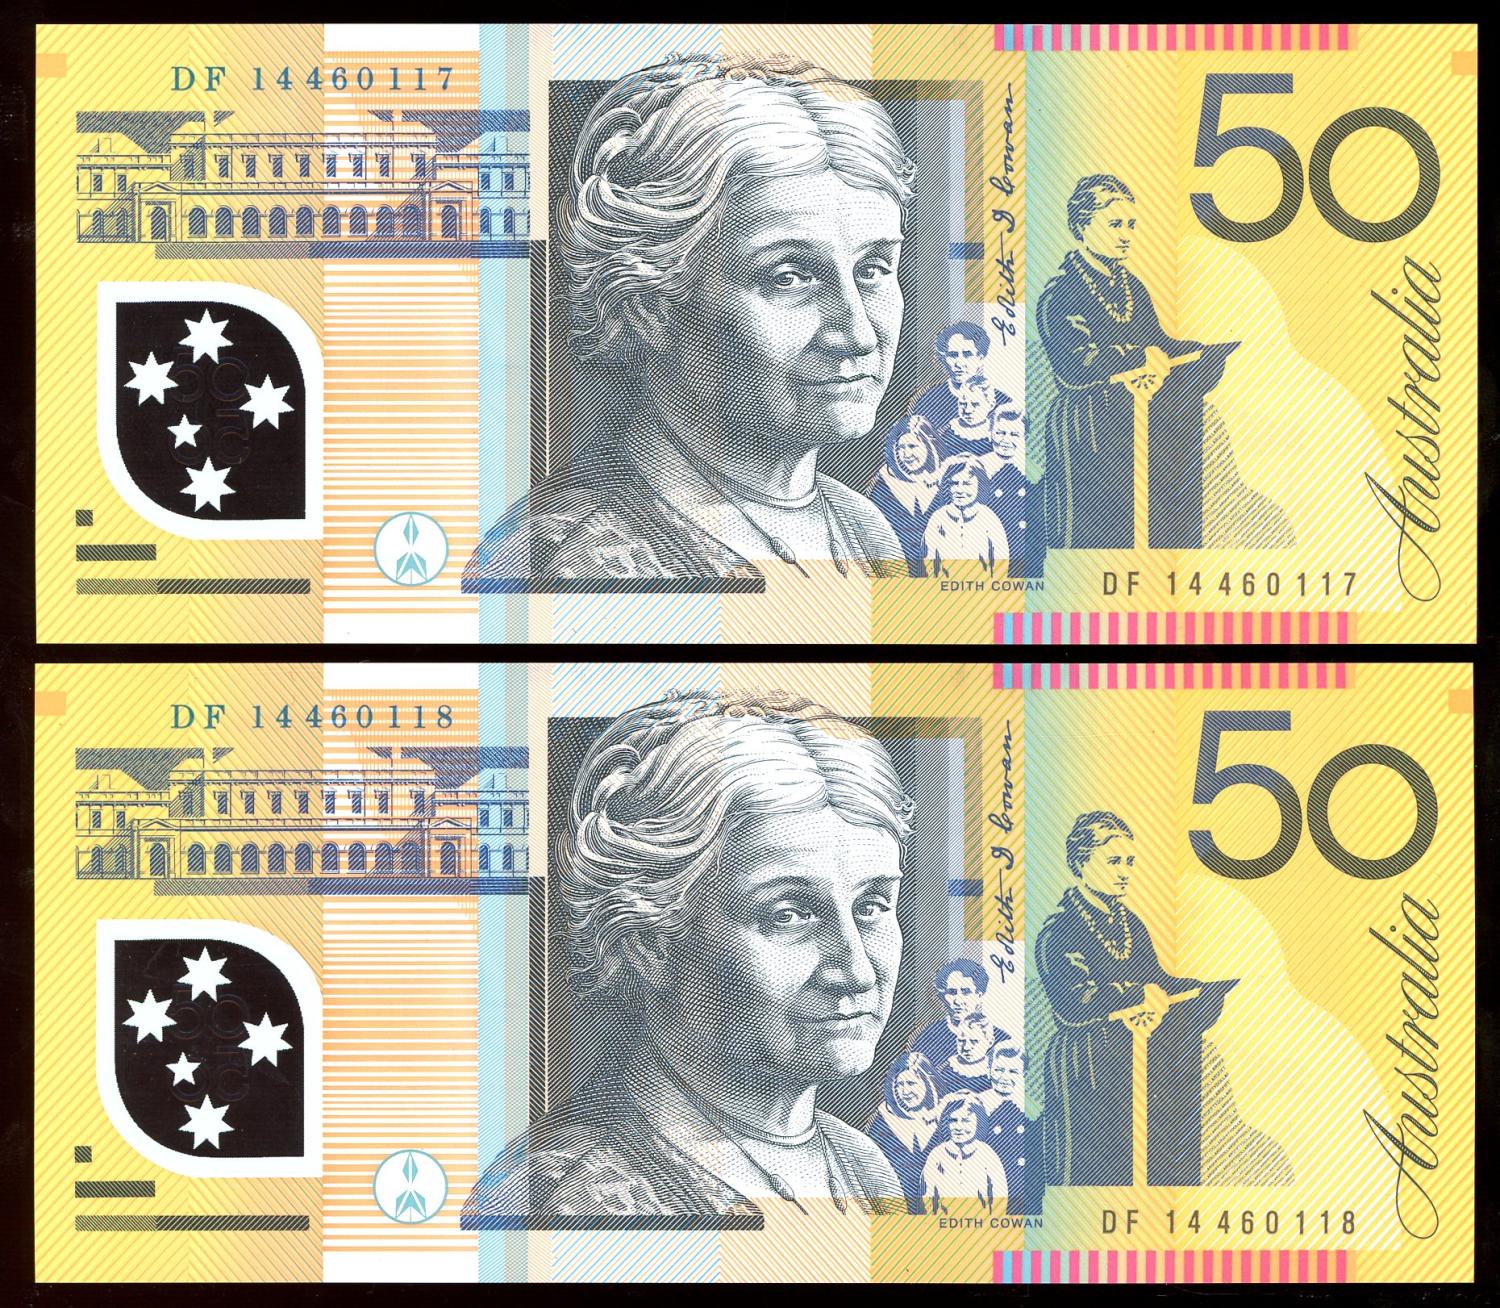 Thumbnail for 2014 Consecutive Pair $50 Polymer DF14 460117-118 UNC